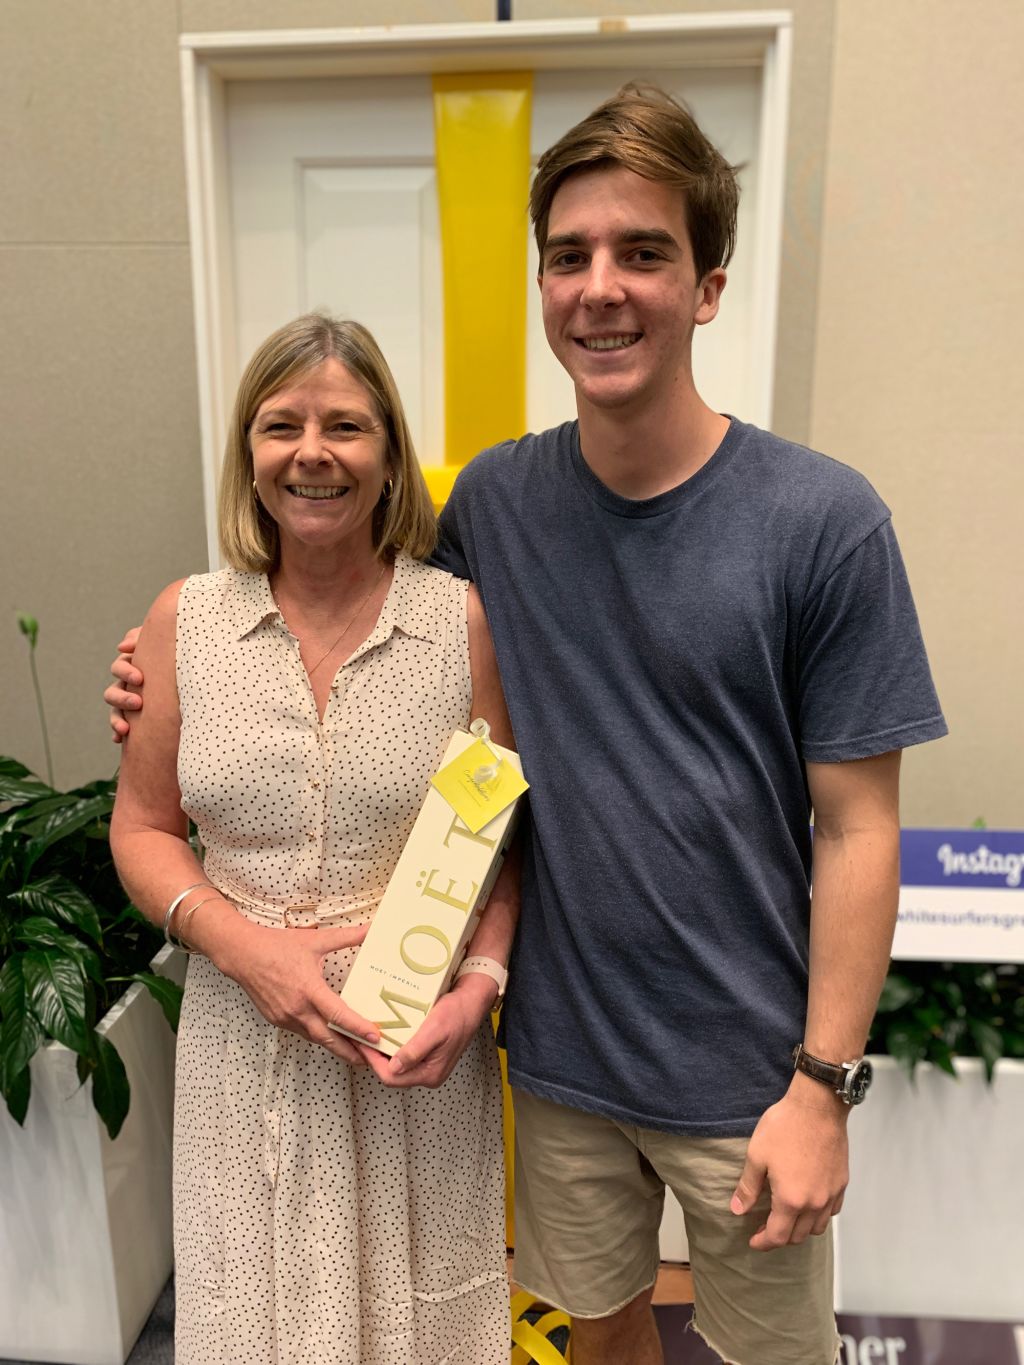 Gold Coast local Lyndal Solomon and her son Fraser will now call 1/56A Back Street, Biggera Waters home, after making the winning bid of $1,010,000 at the Ray White auction Event on Monday, Jan 28. Photo: Ellen Lutton